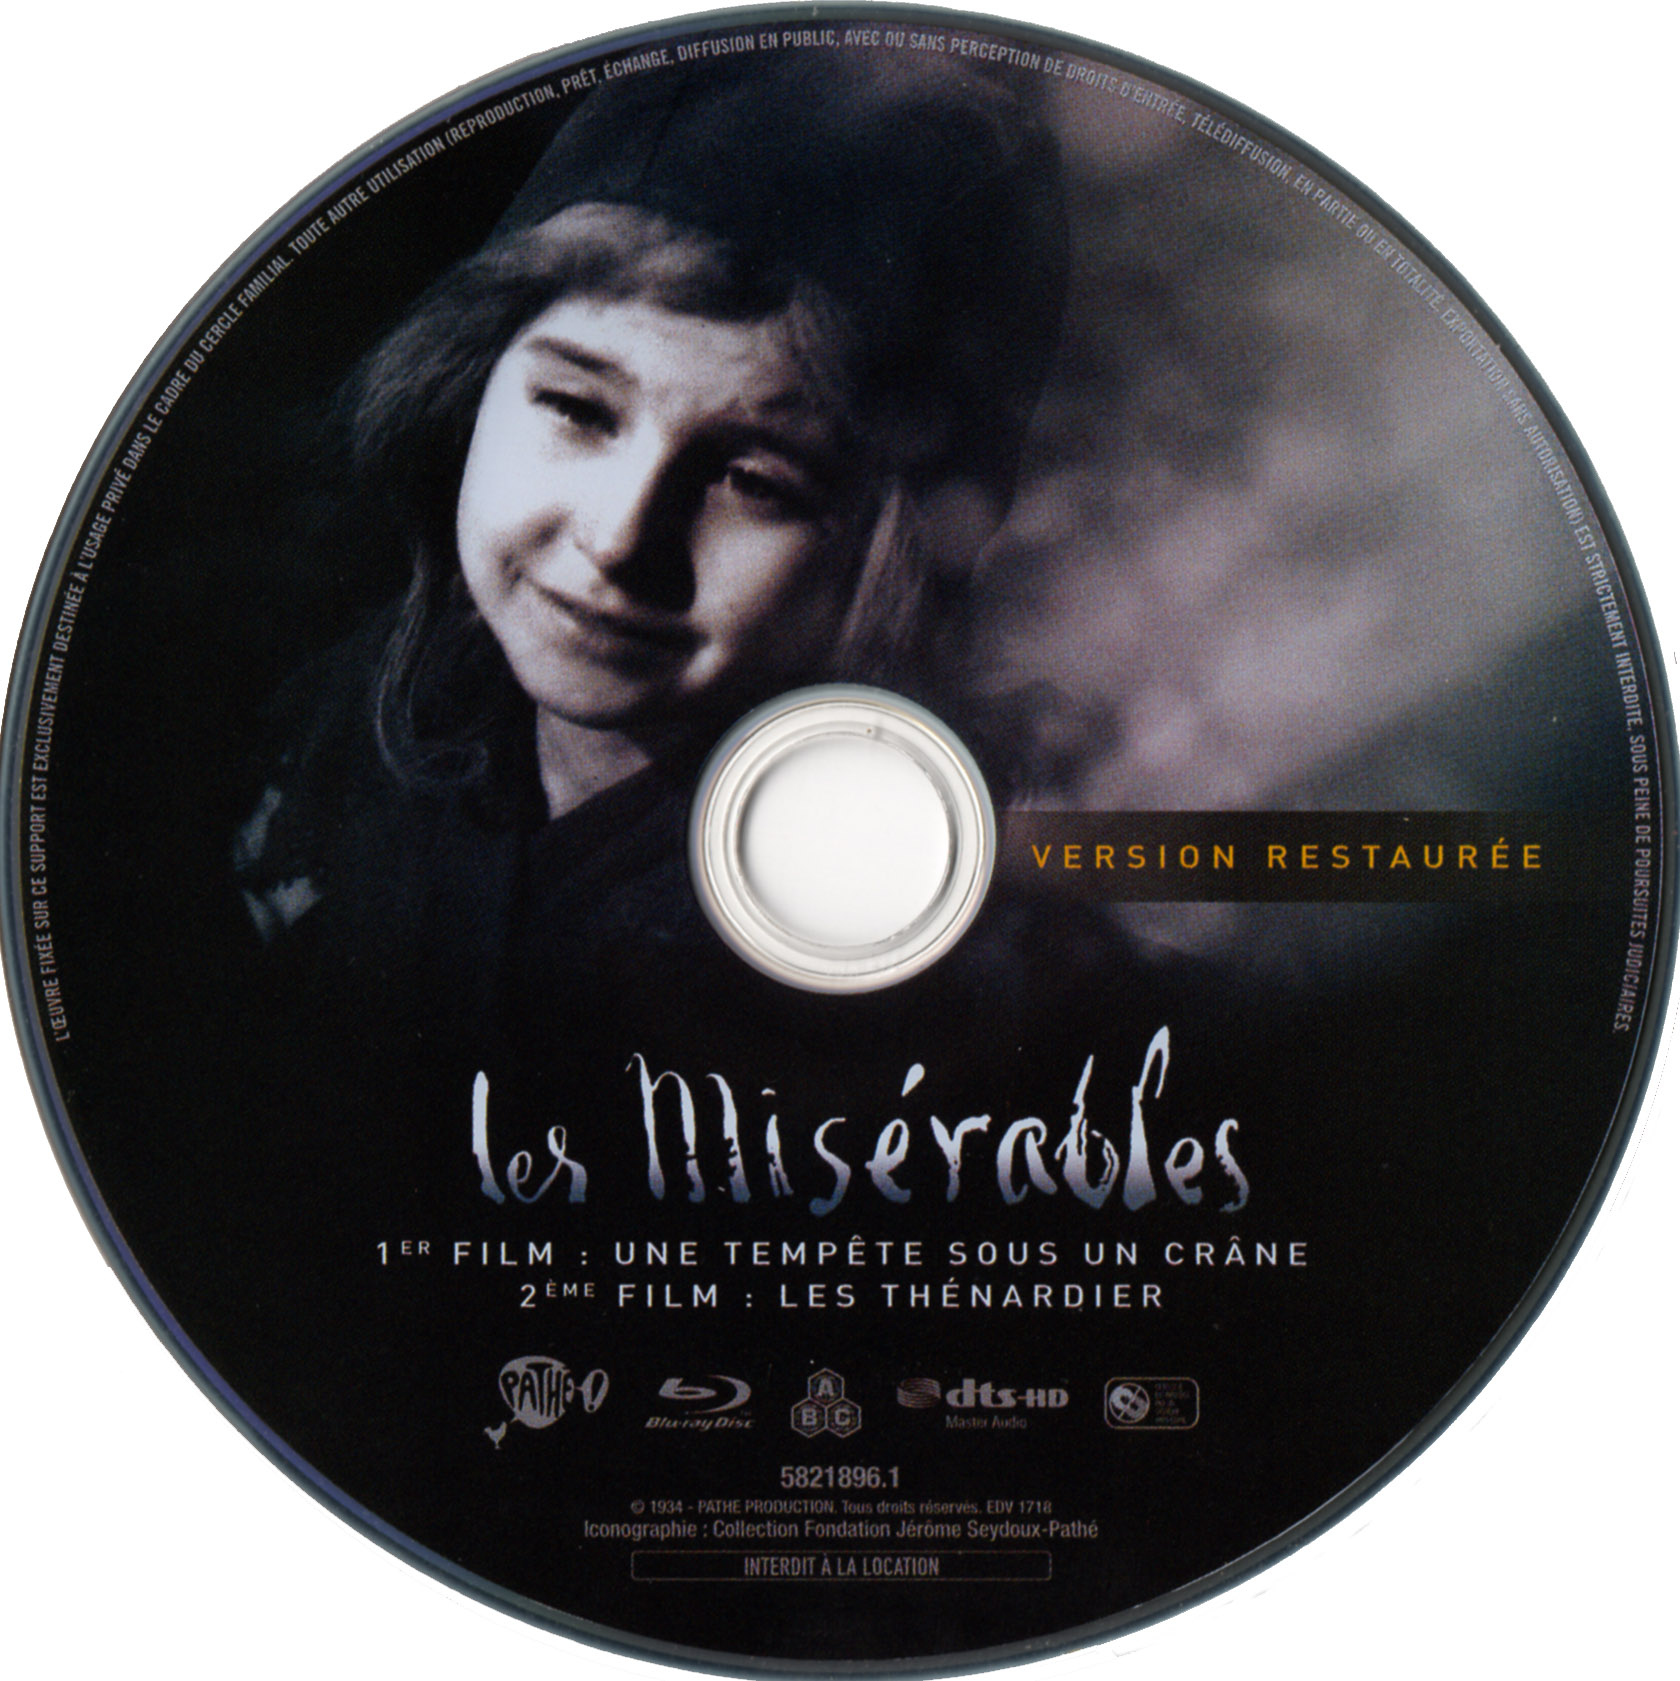 Les misrables (1933) (BLU-RAY) DISC 1